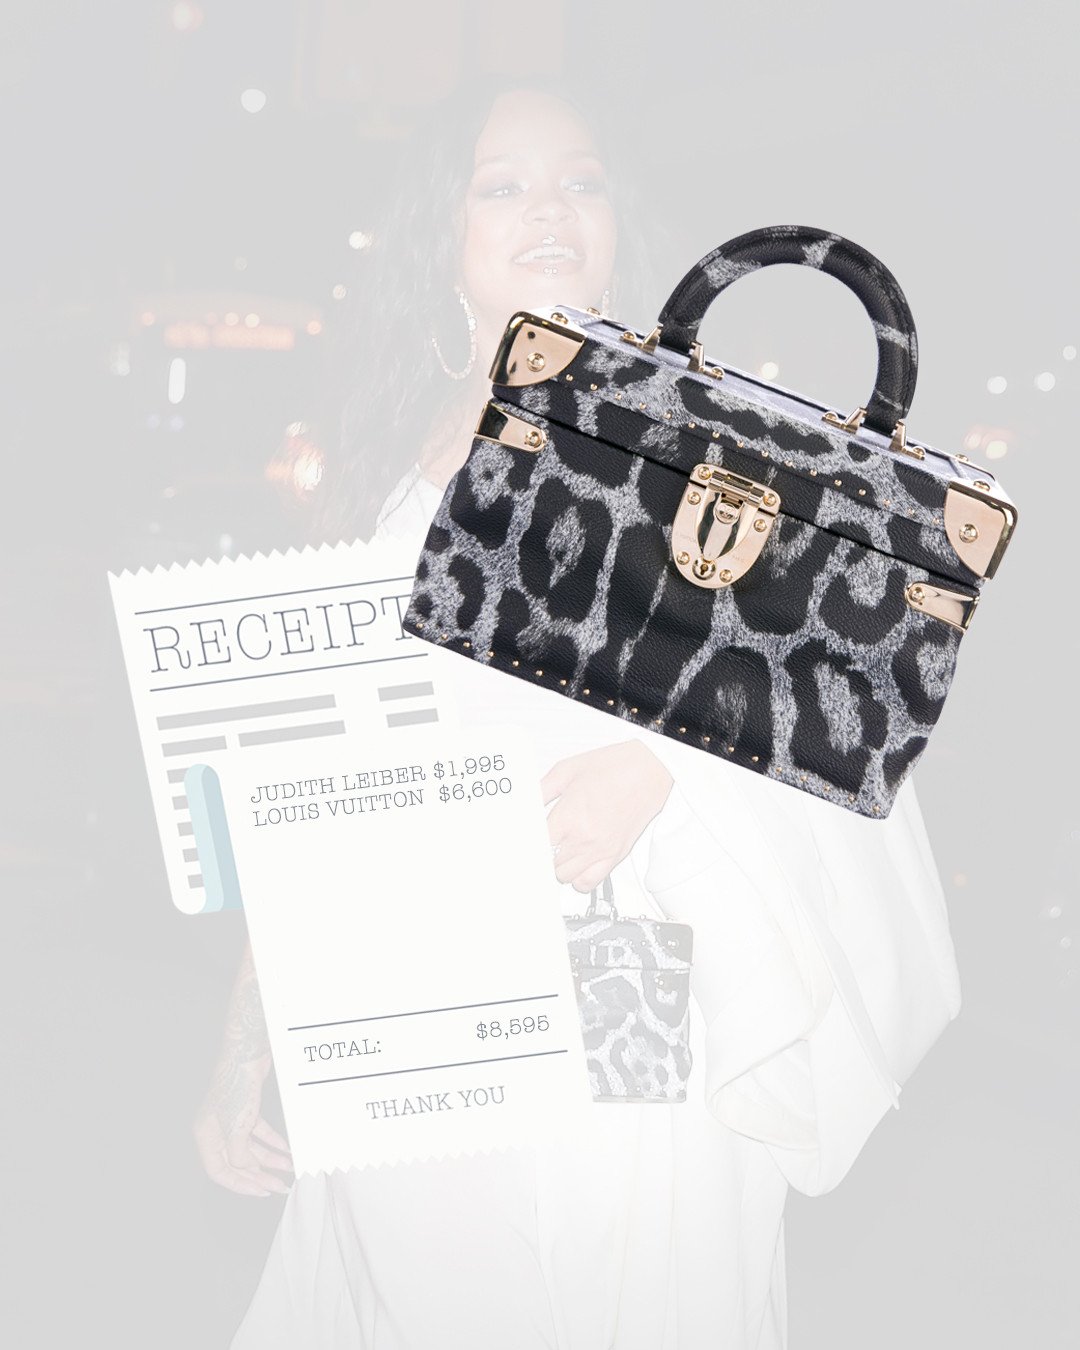 Rihanna is worth $120 MILLION but carries least expensive Louis Vuitton  purse in NYC